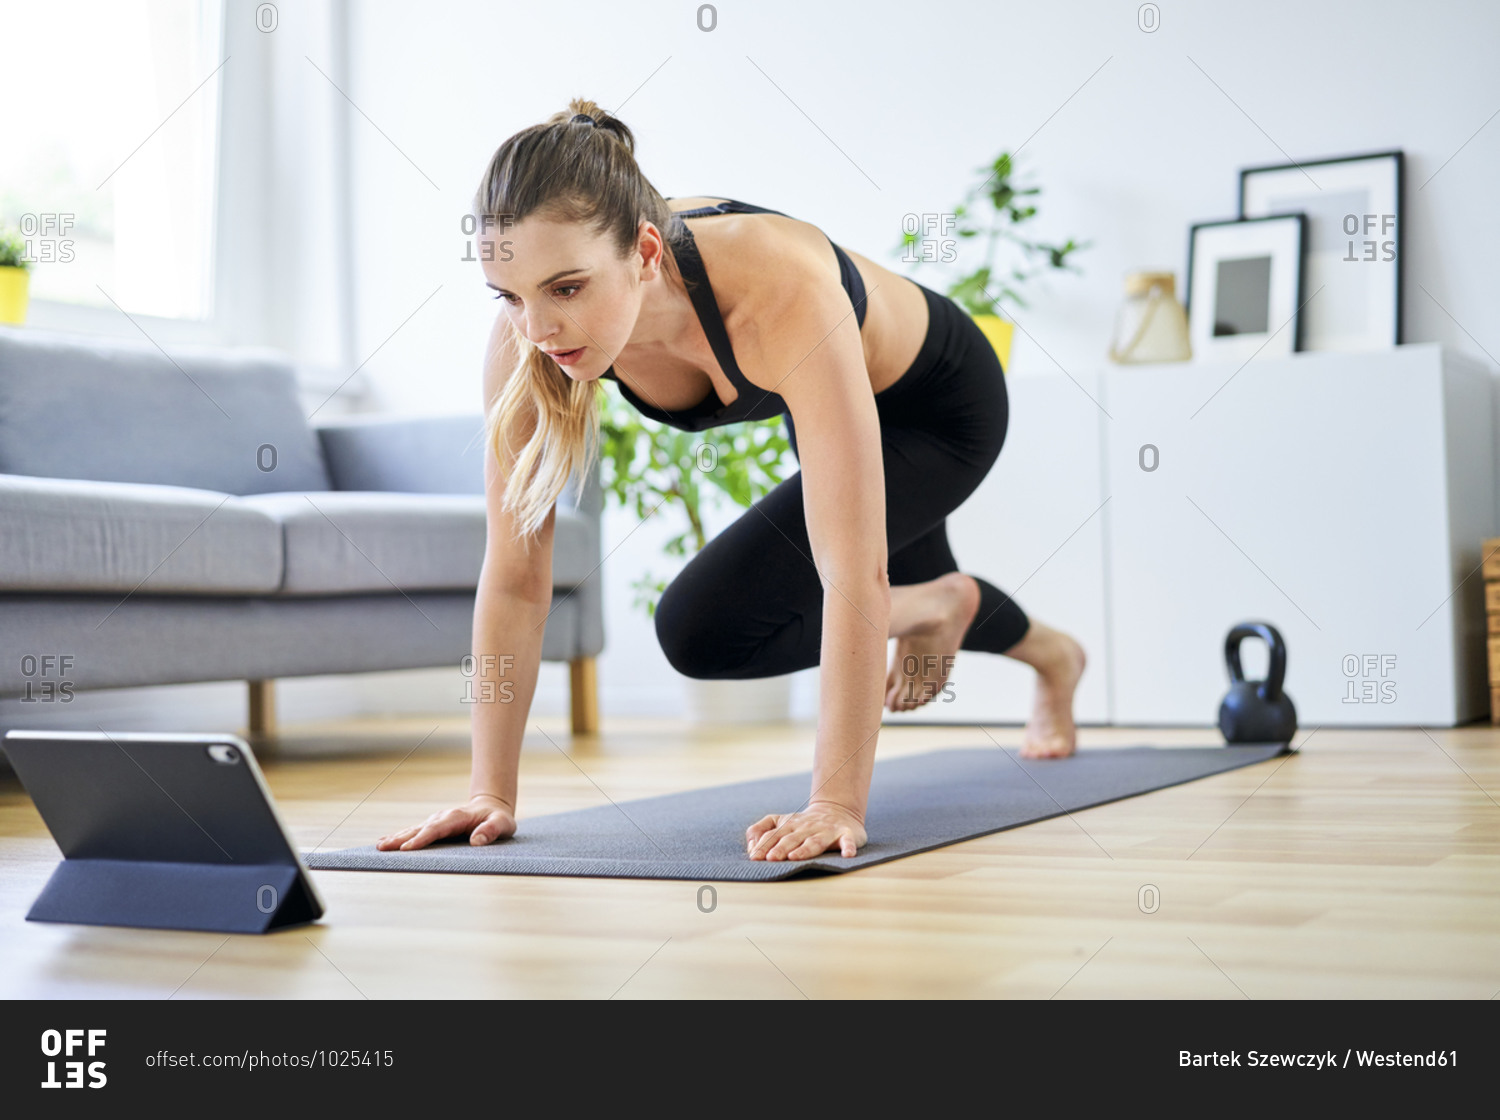 Determined woman learning mountain climber exercise through internet on digital tablet